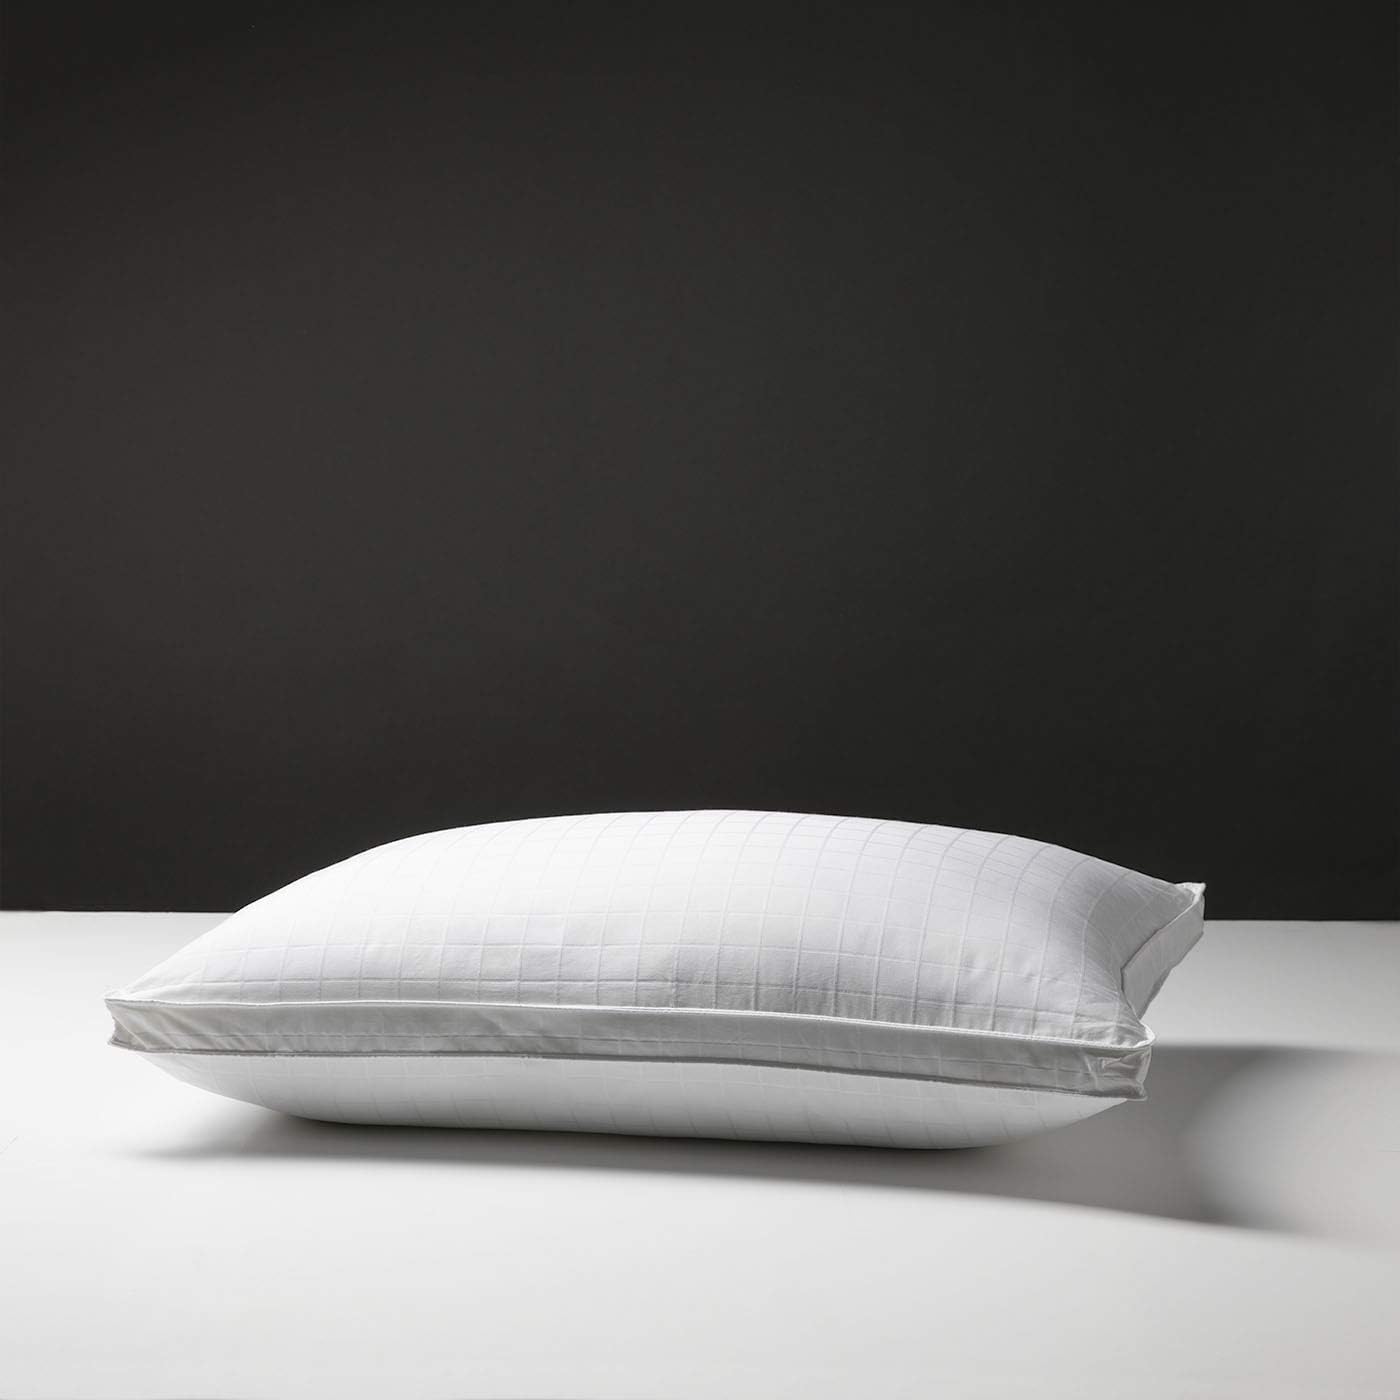 Sobella Supremo Side and Stomach Sleeper Pillow | Hotel and Resort Quality